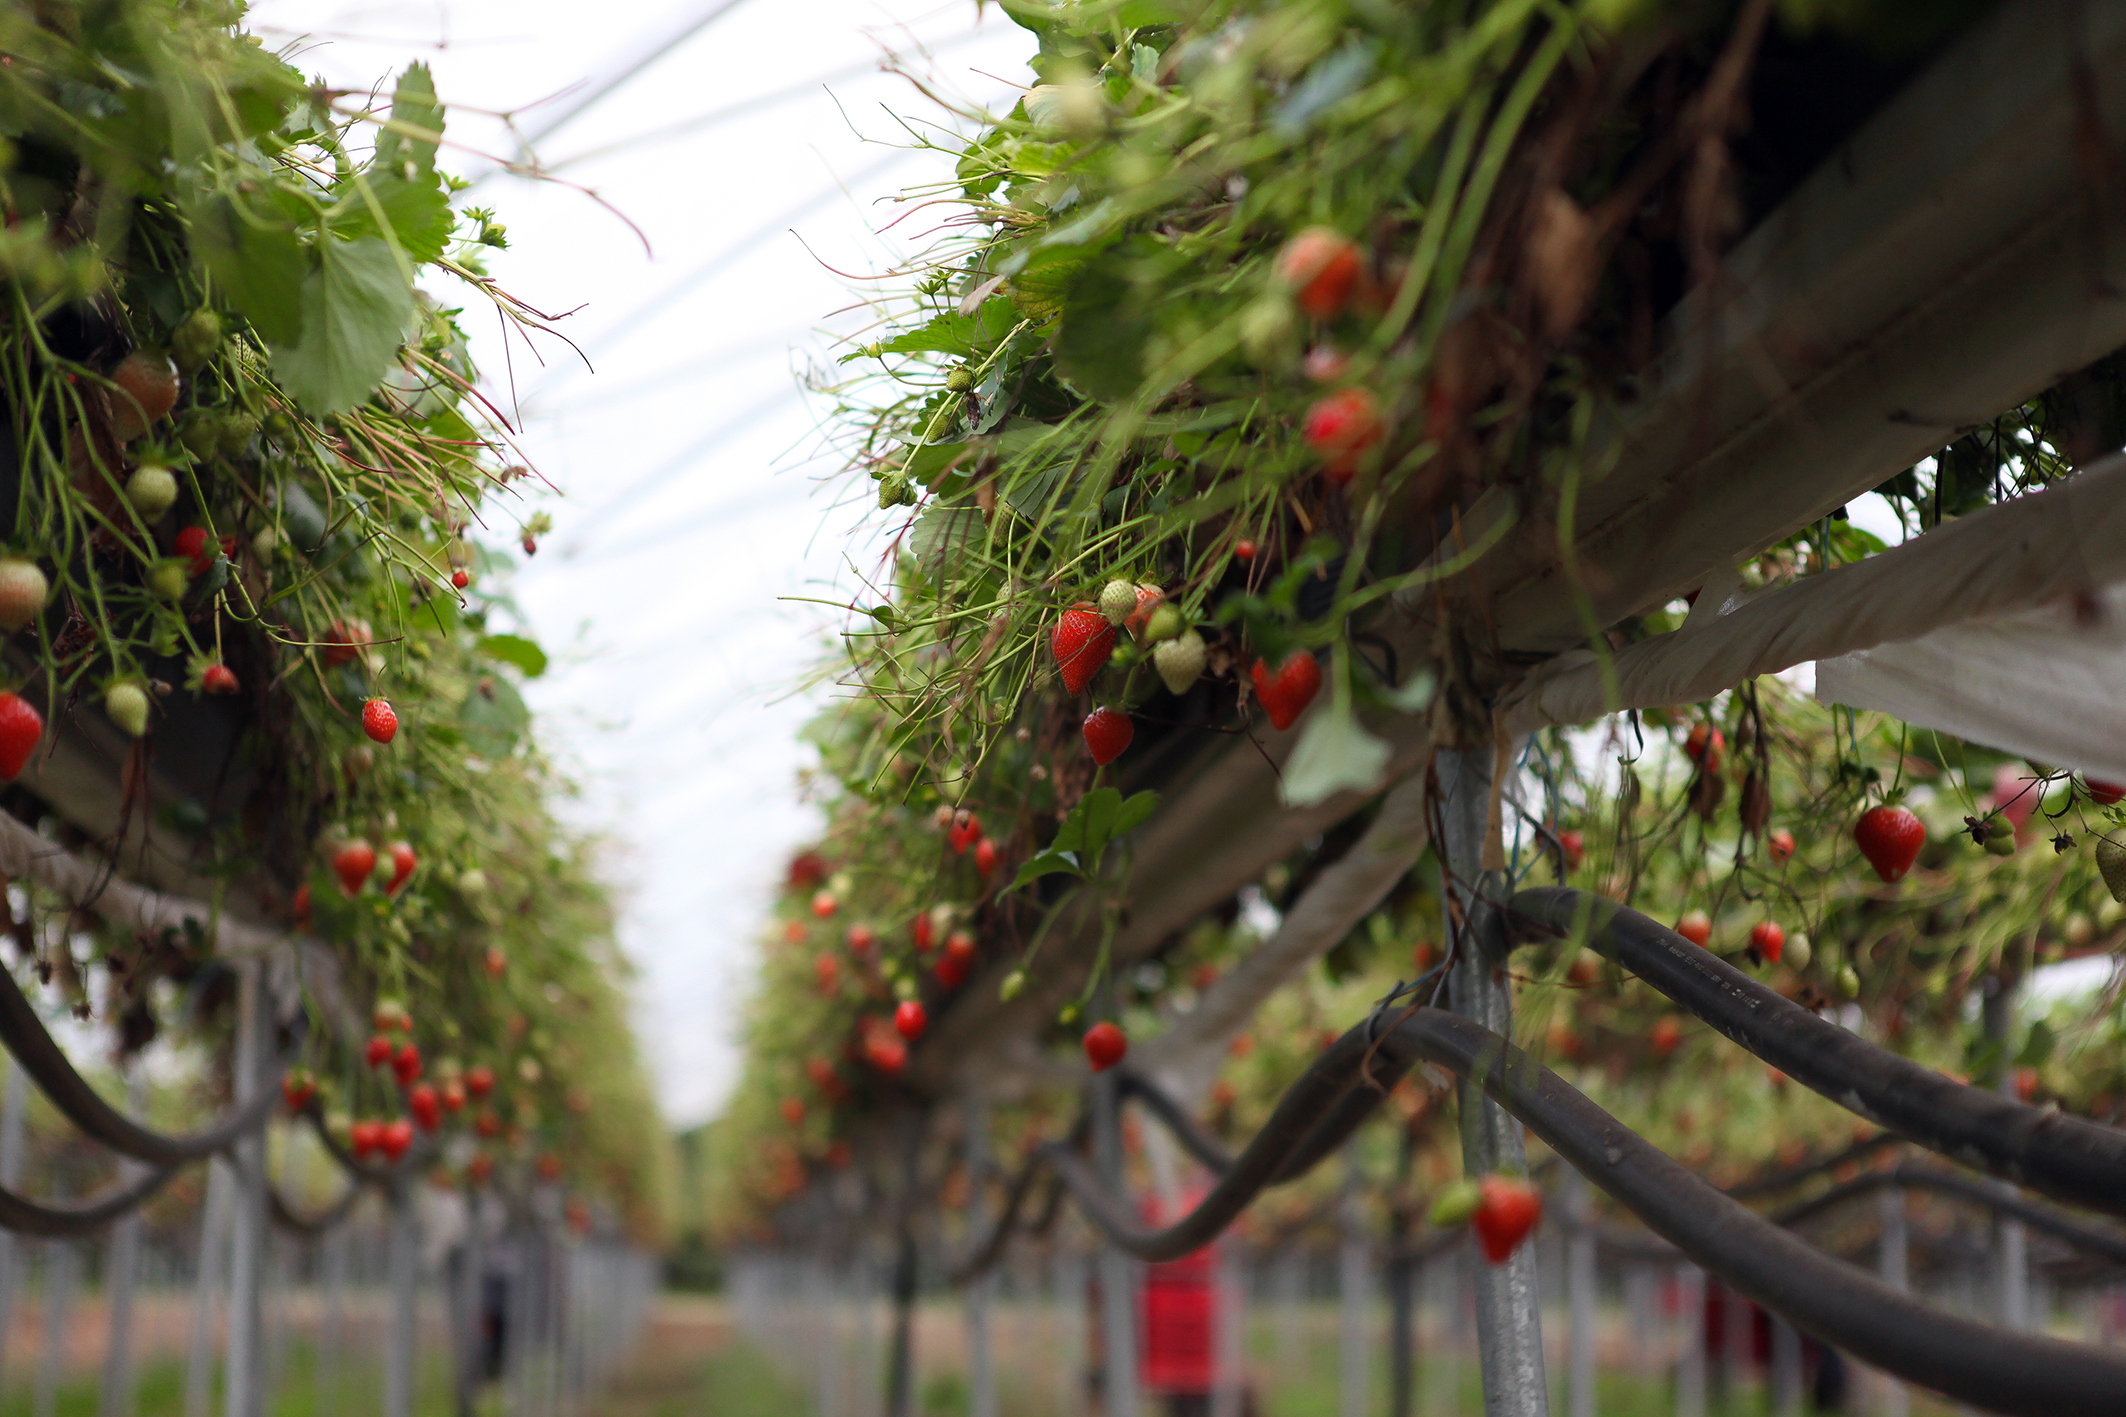 S&A Produce Ltd in Marden...Pic is. A long row of ripe strawberies at Brook Farm..